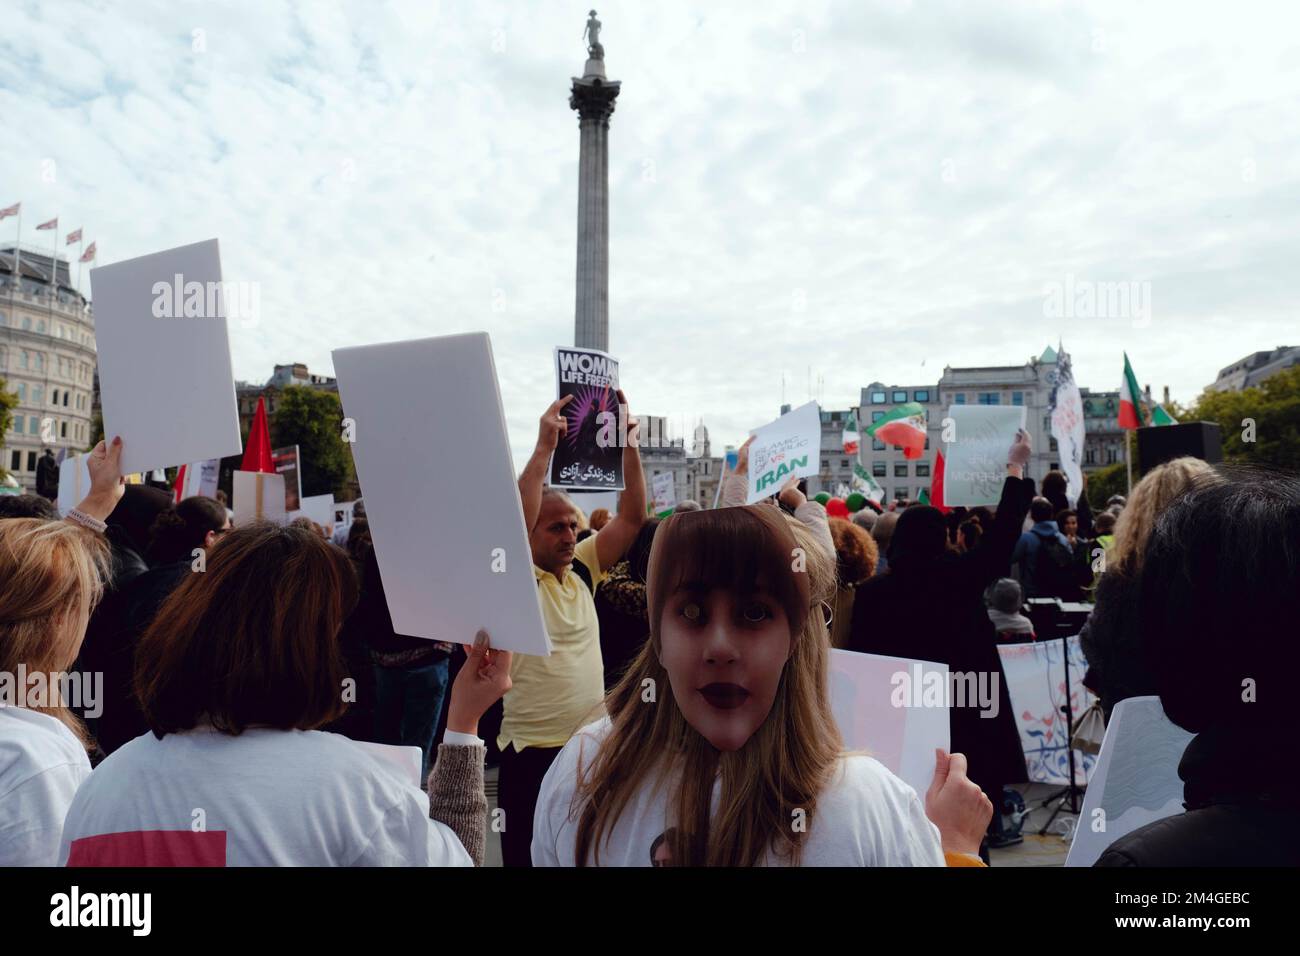 London, UK. 1 OCT, 2022. Iranian people and supporters gathered in Trafalgar Square to protest Iran's regime over the death of Mahsa Amini, who died in police custody in Iran after being detained for allegedly not wearing a head scarf (hijab). Stock Photo